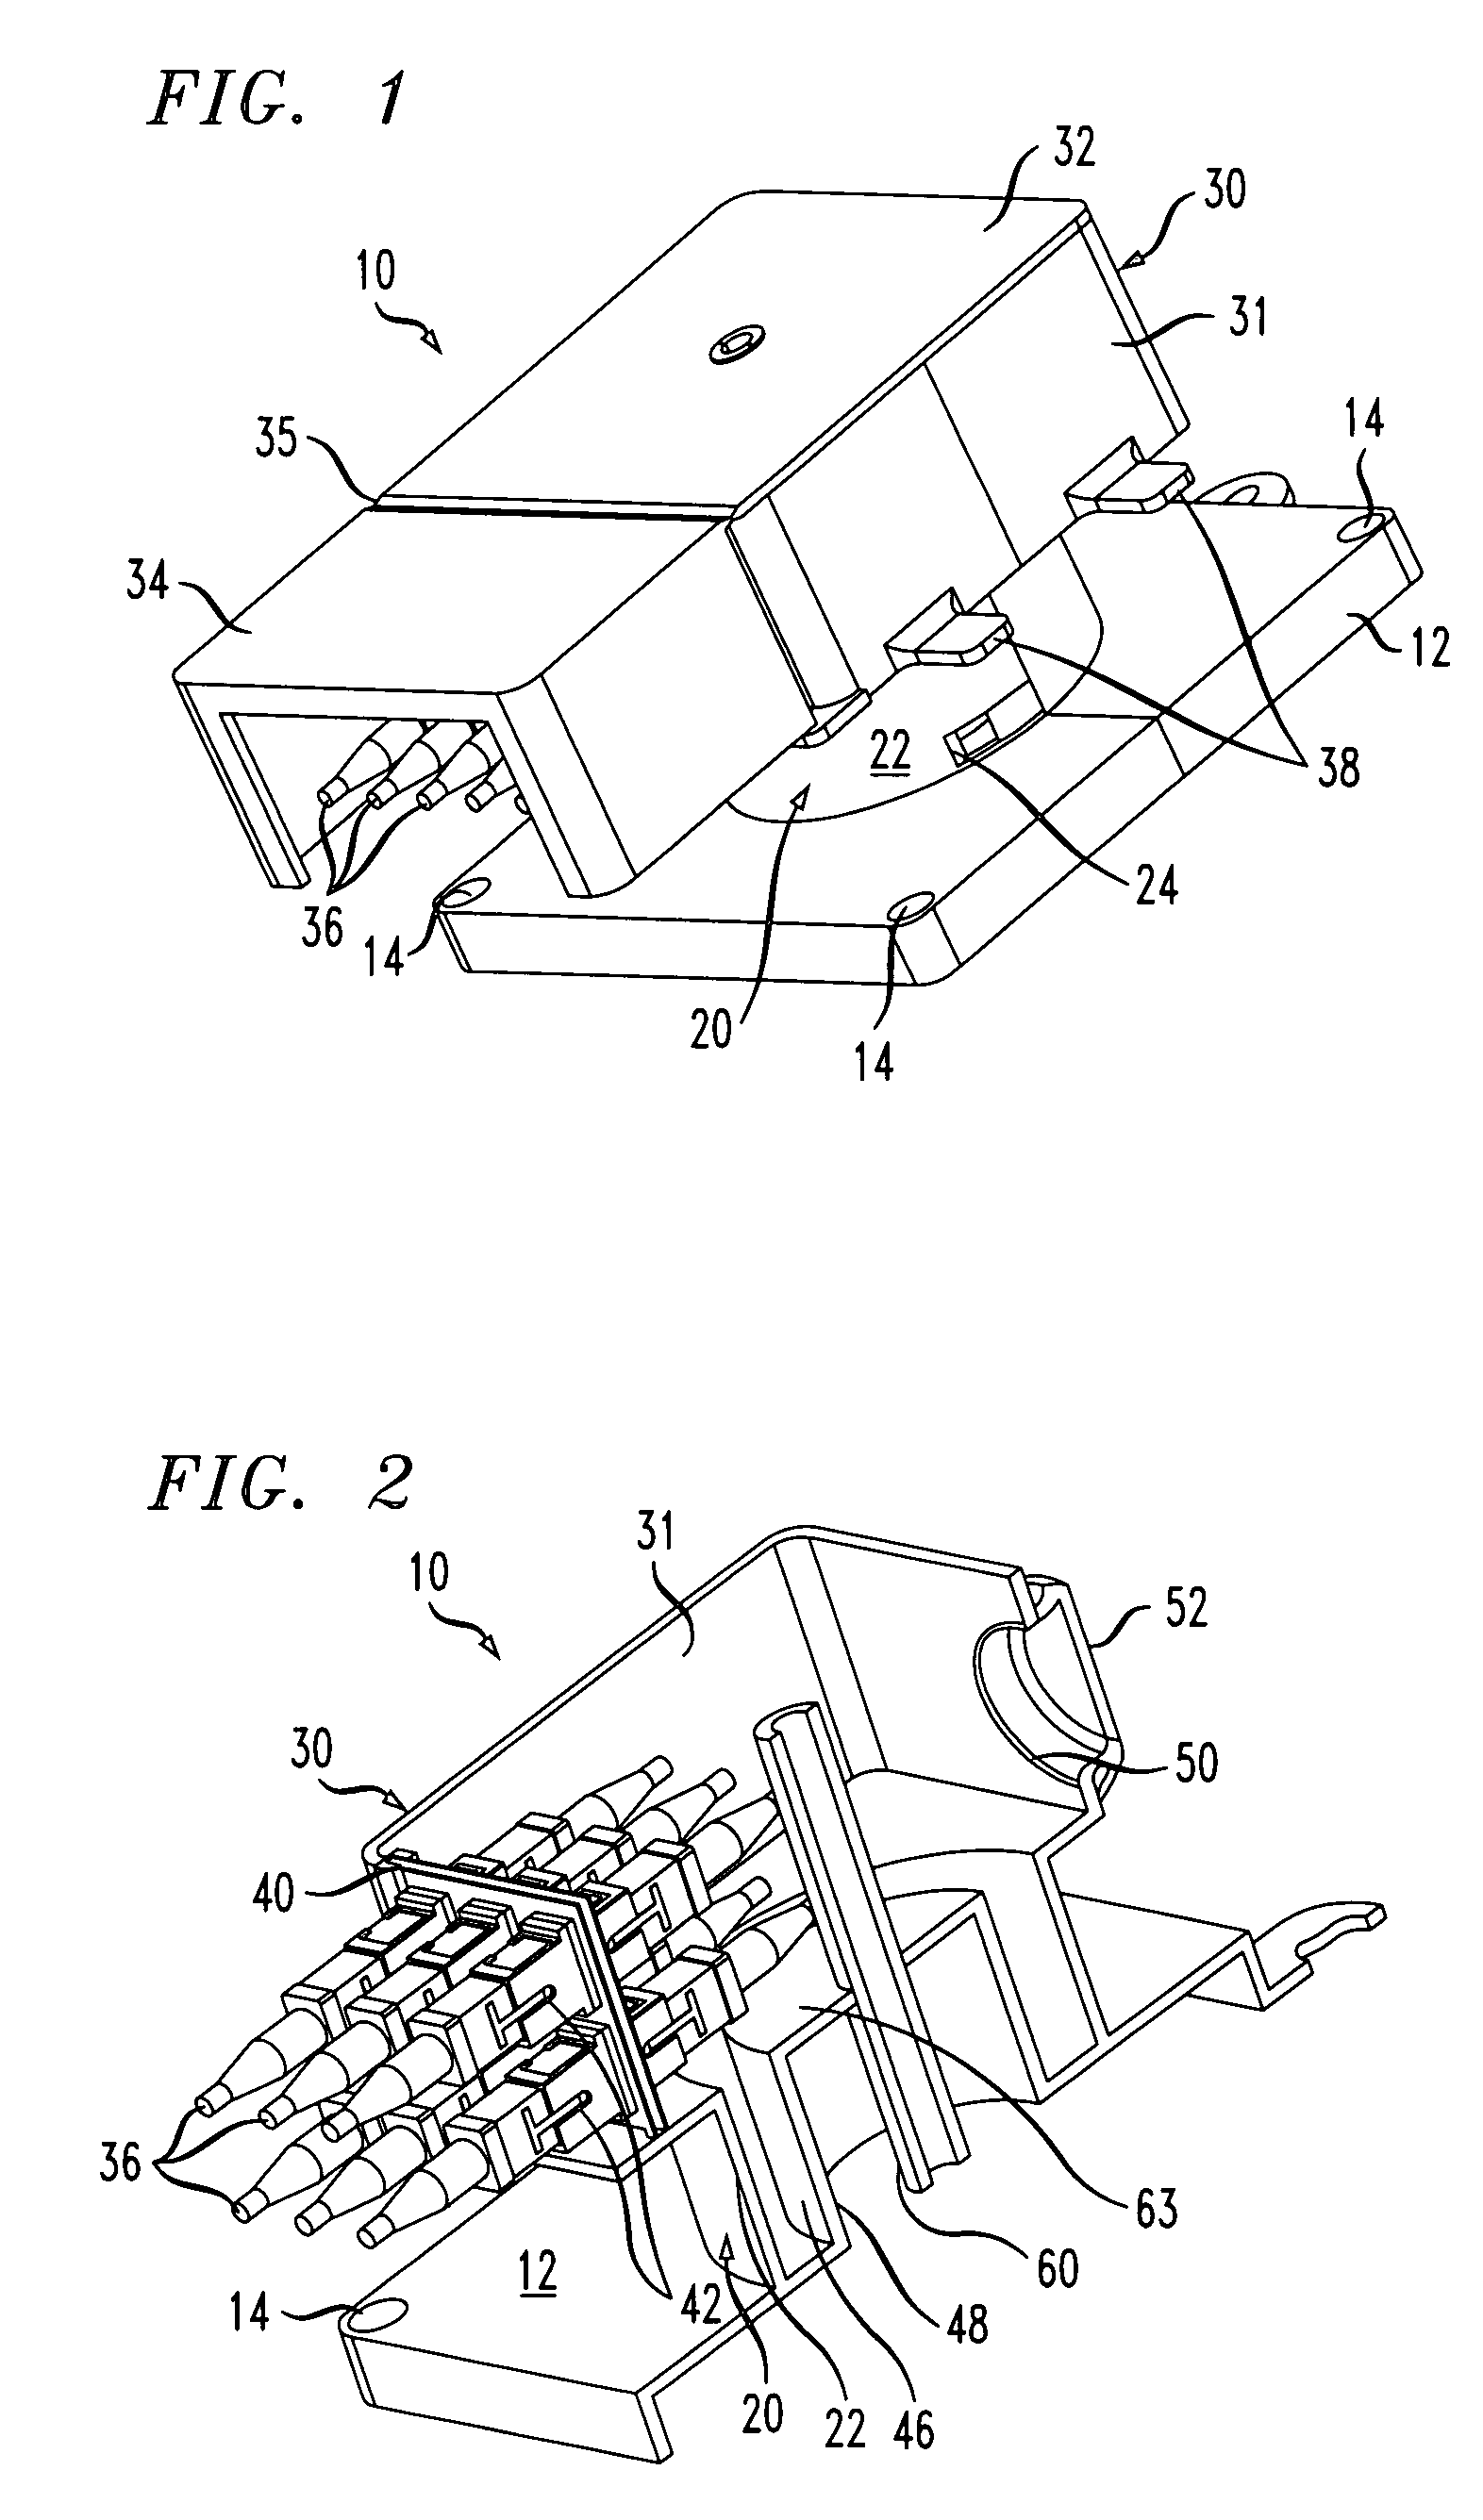 Wall-mountable optical fiber and cable management apparatus